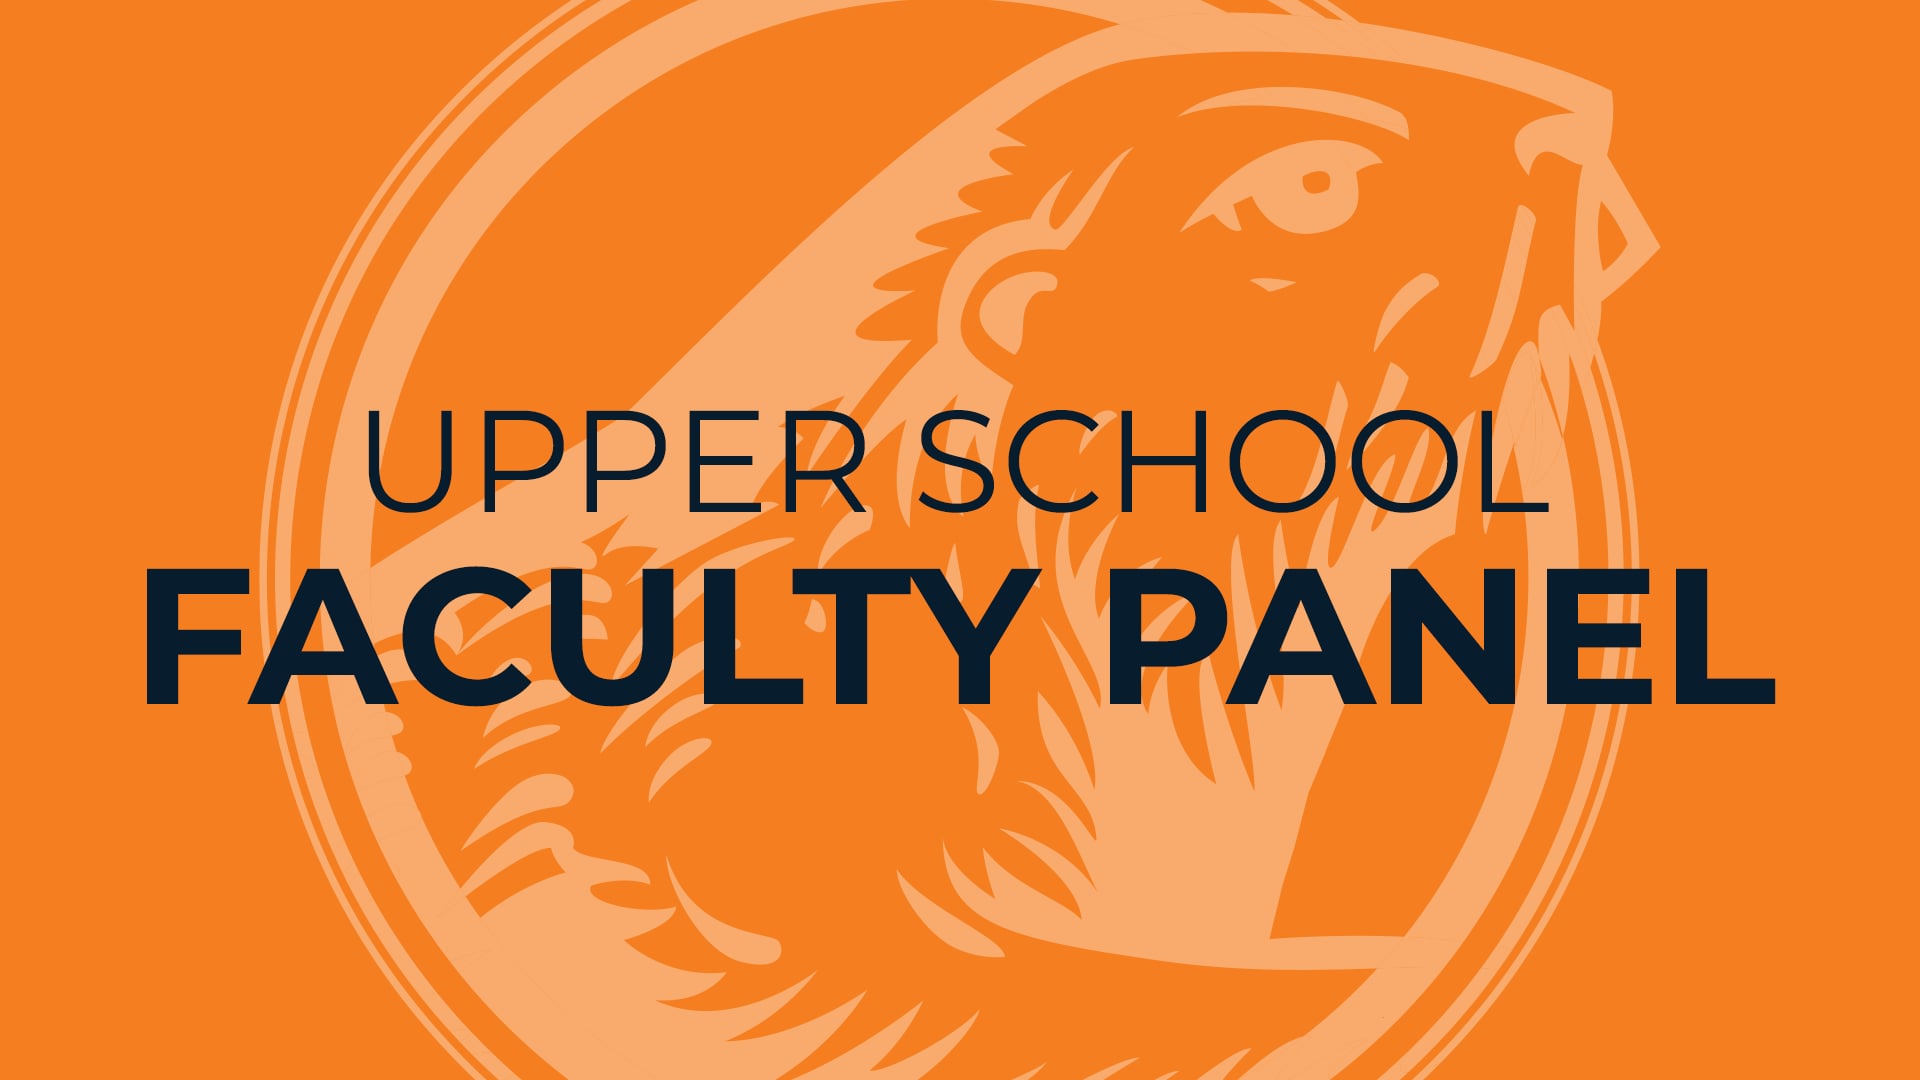 Upper School Faculty Panel: Revisit Day 2020